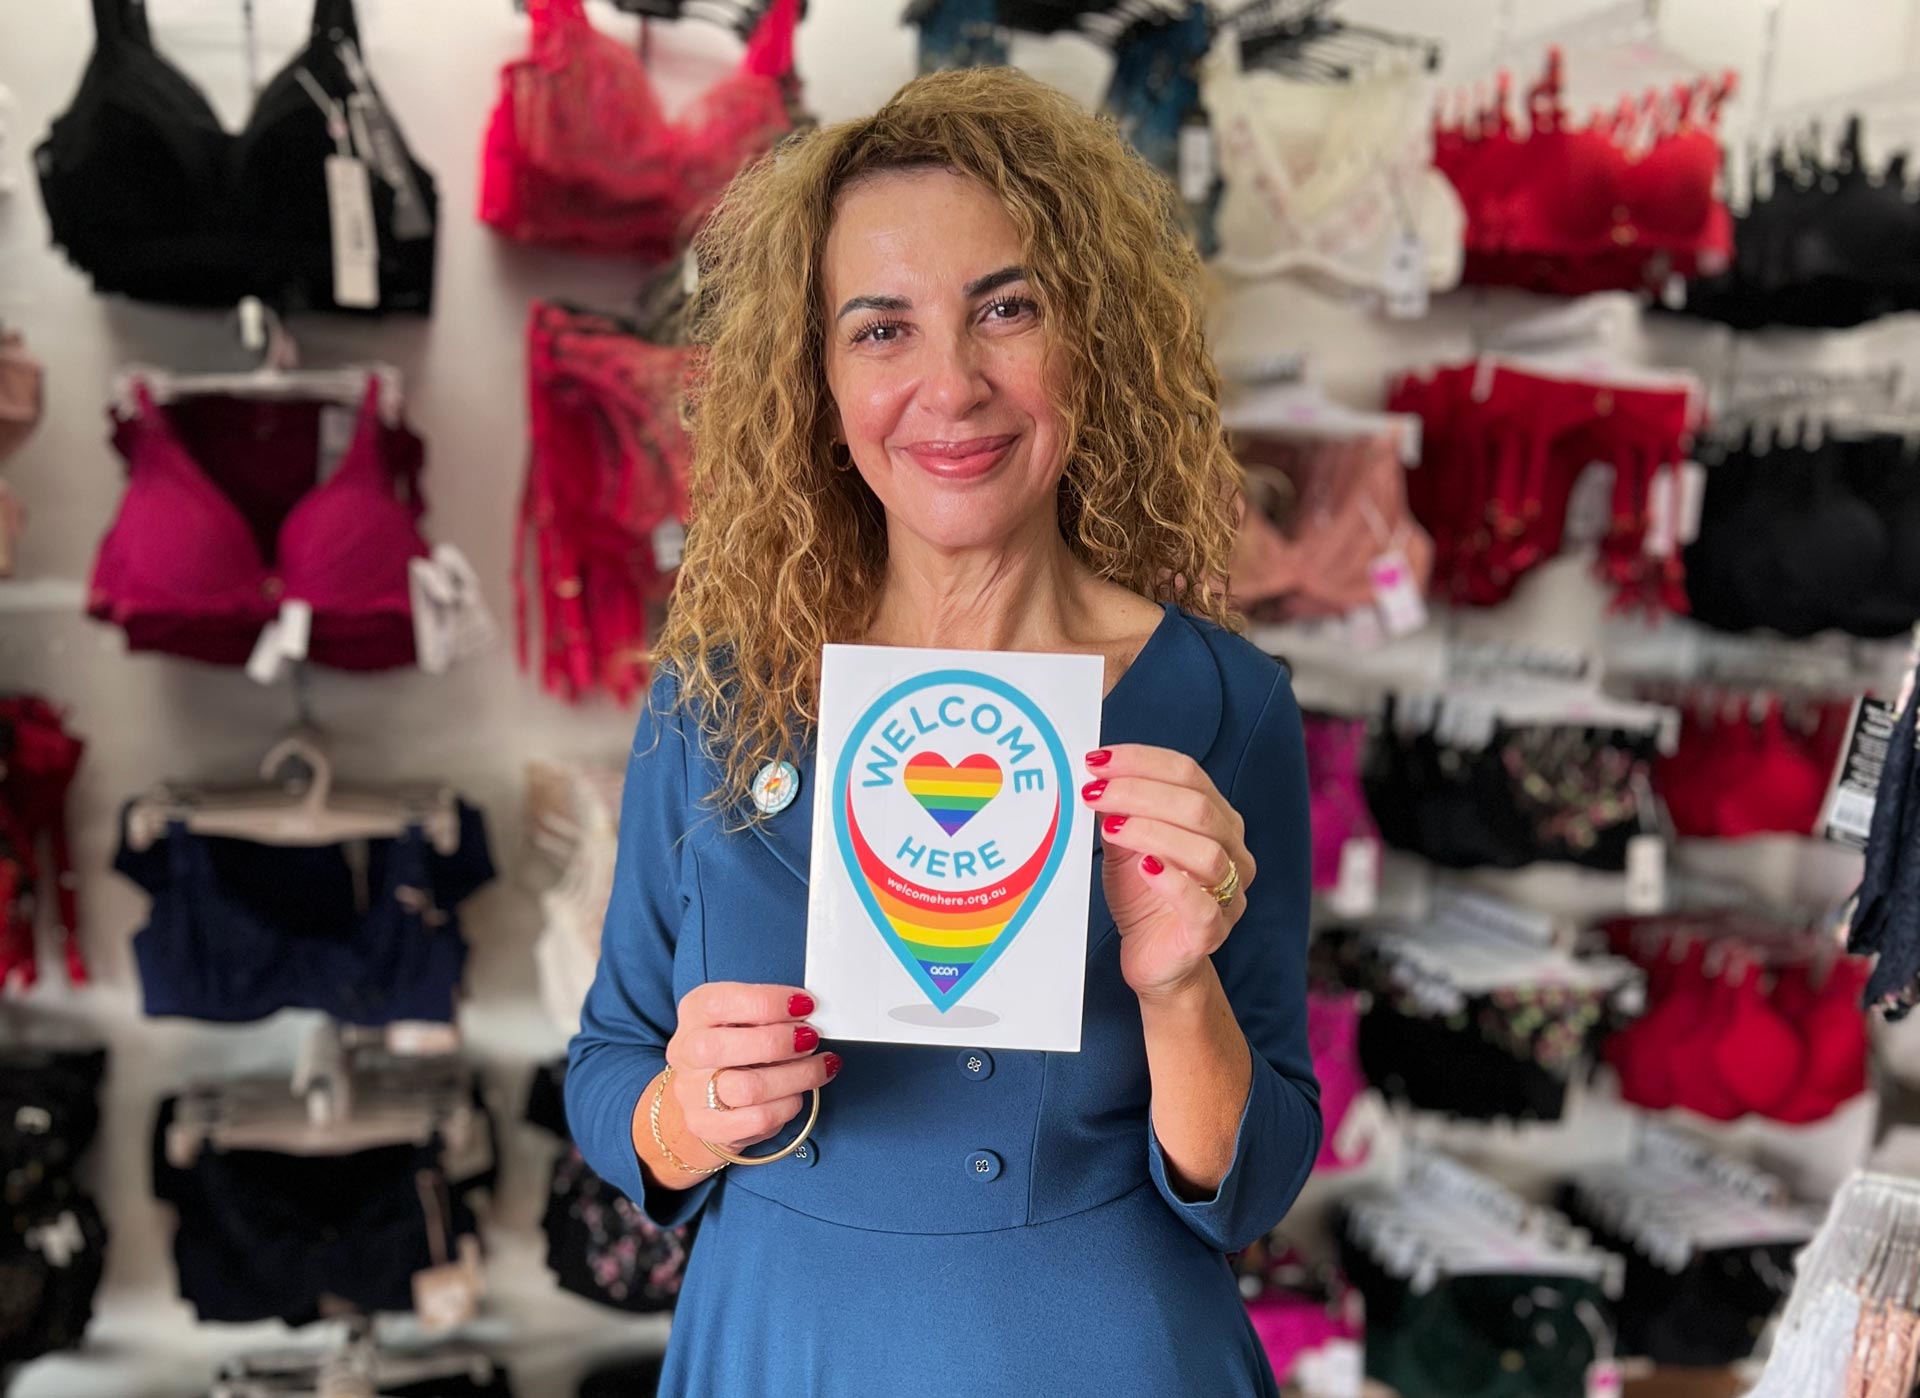 Melbourne Bra Fitter Holding Welcome Here Project Sticker